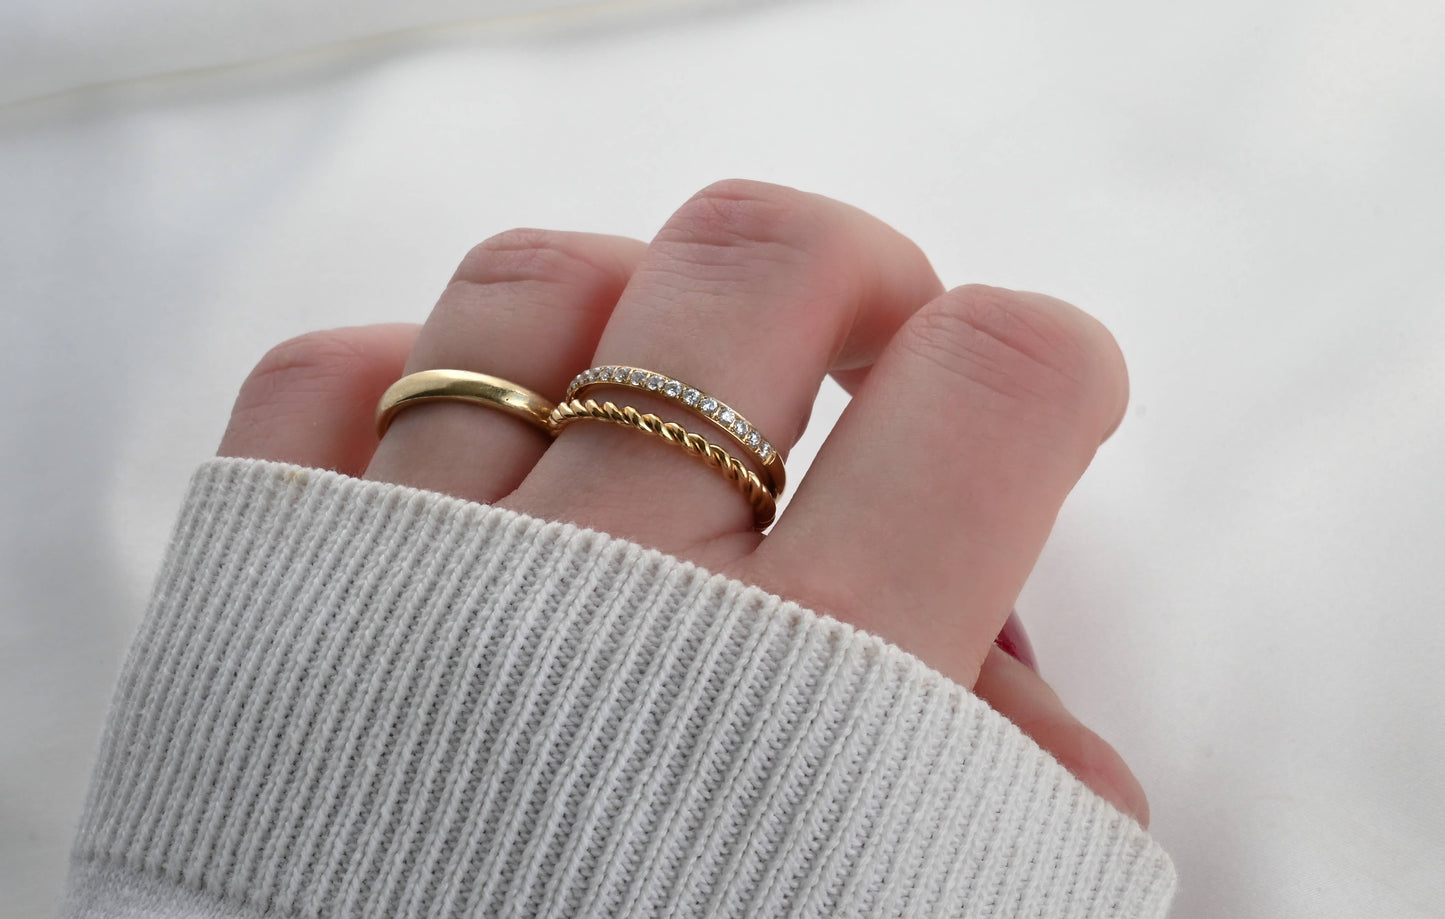 Stacked Double Ring